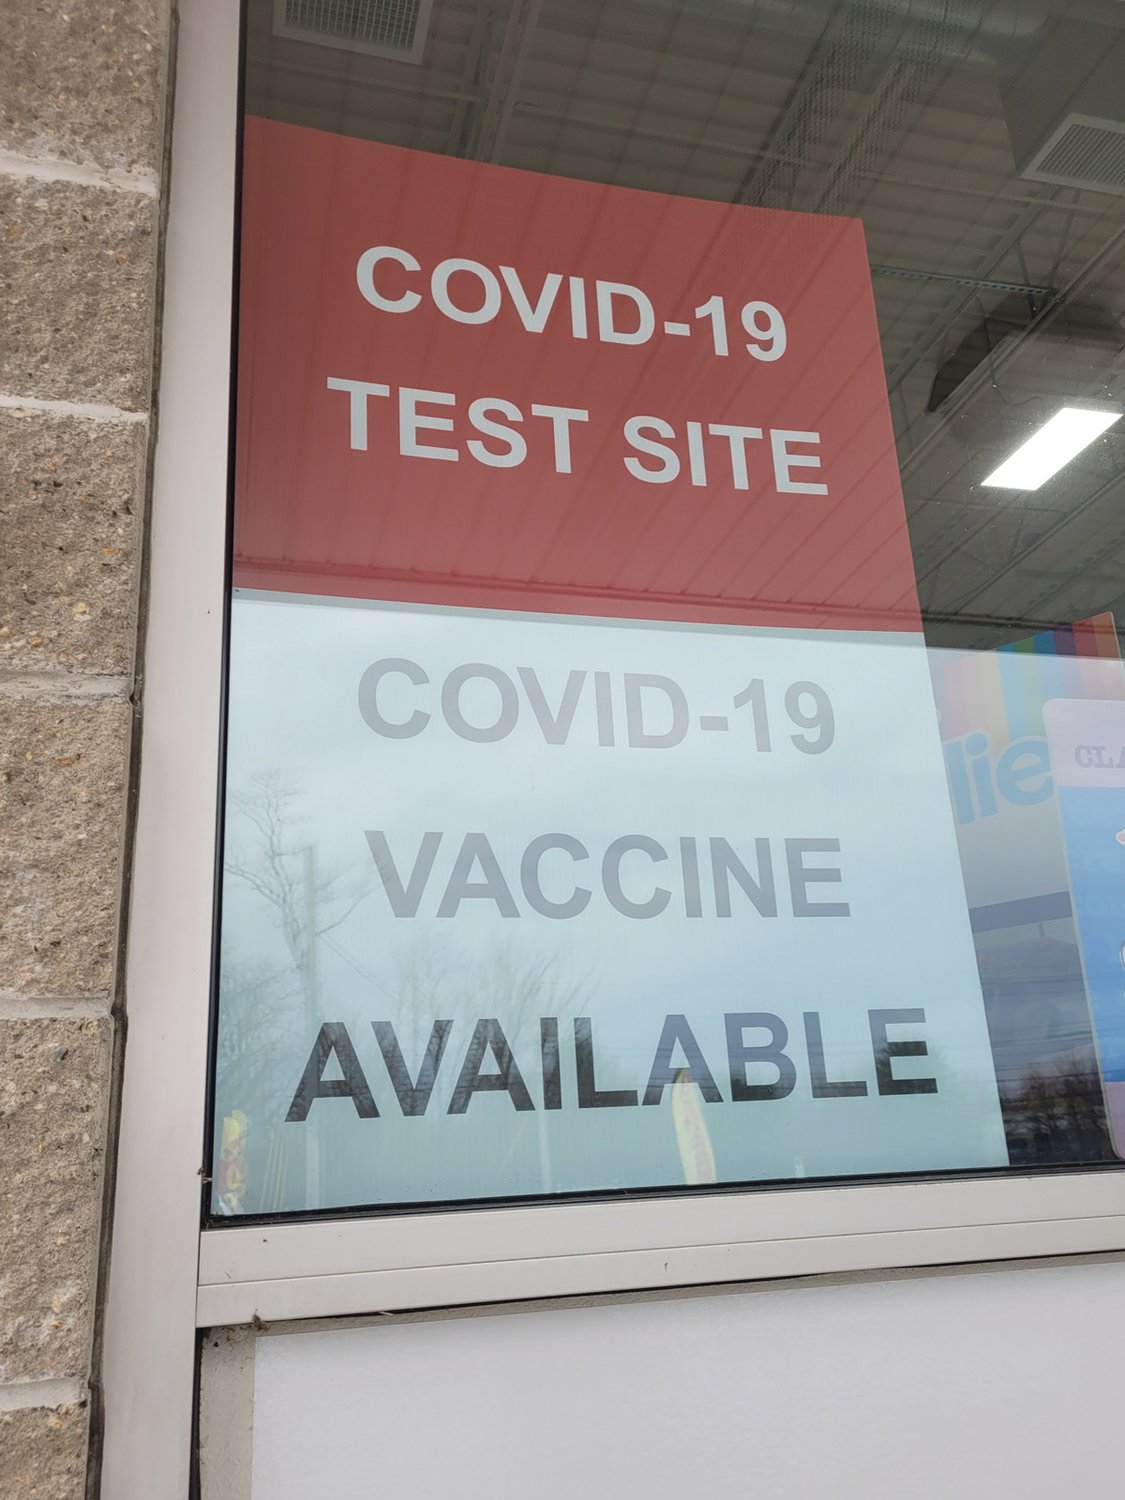 WALK-INS WELCOME: The Atwood Pharmacy, at 1302 Atwood Ave., Johnston, encourages the public to take advantage of their walk-in availability for booster shots, initial vaccinations and COVID-19 testing. Call 401-300-4443 for more information.